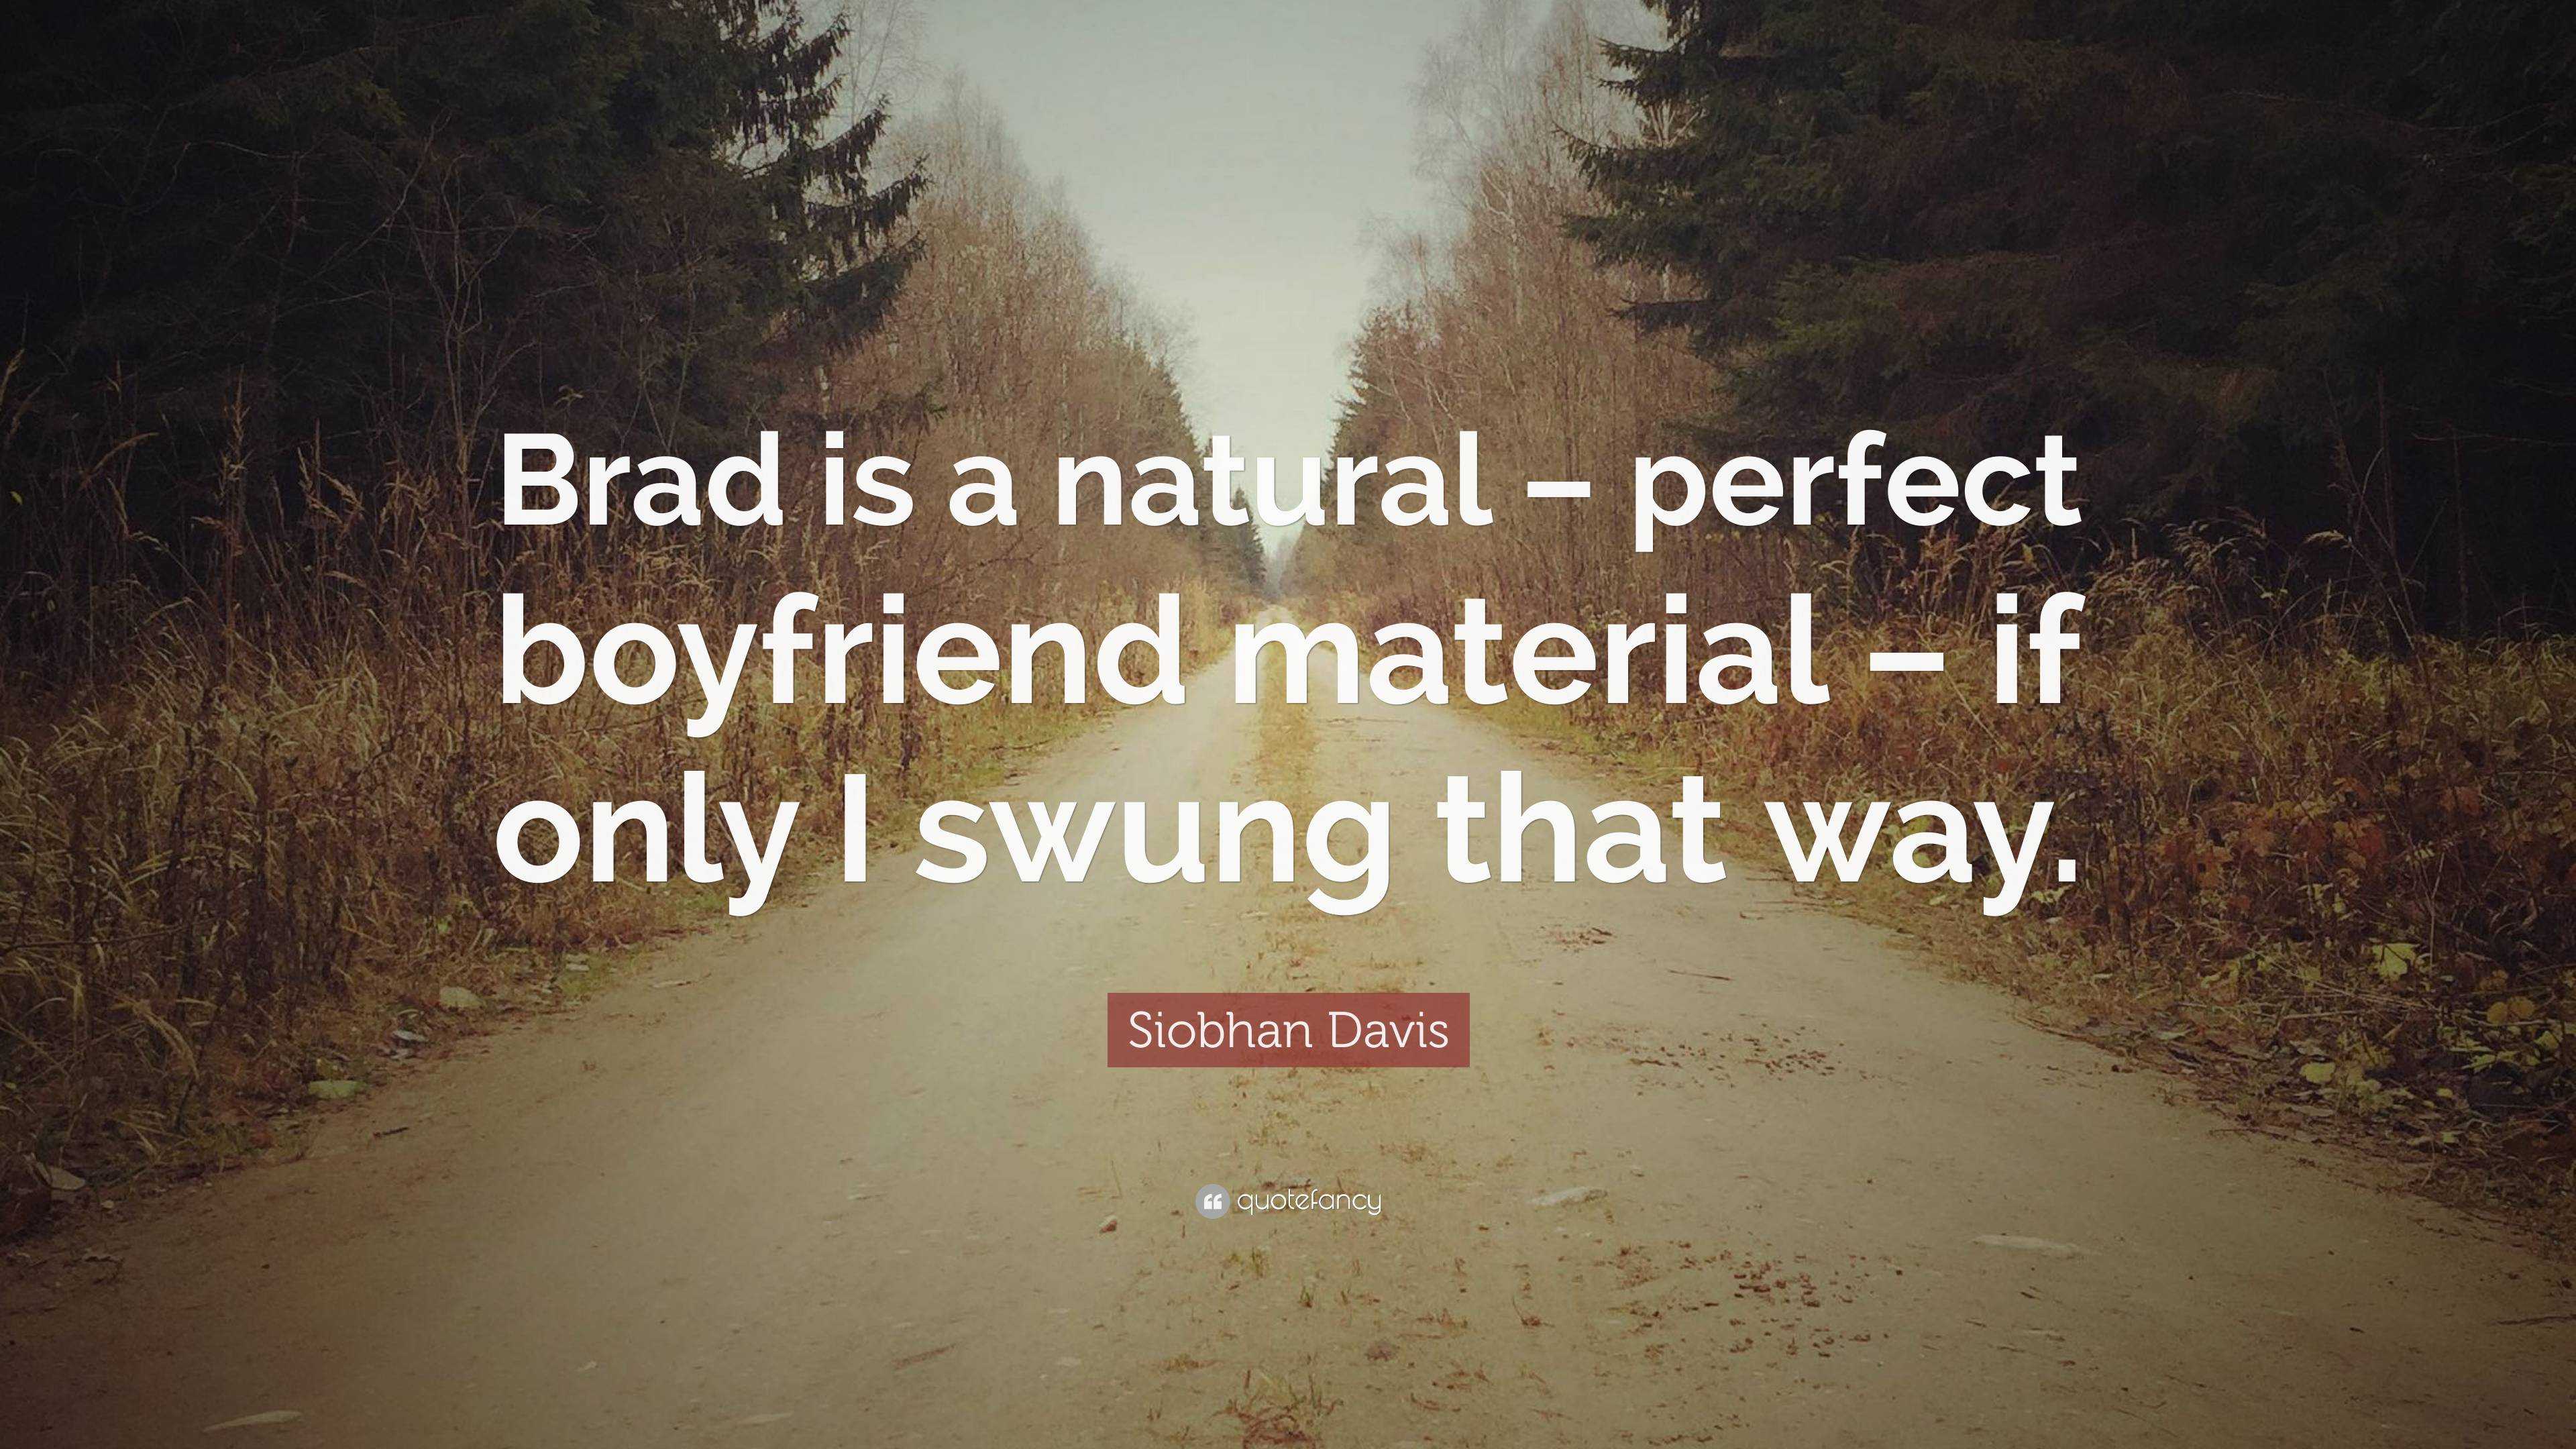 quotes about the perfect boyfriends